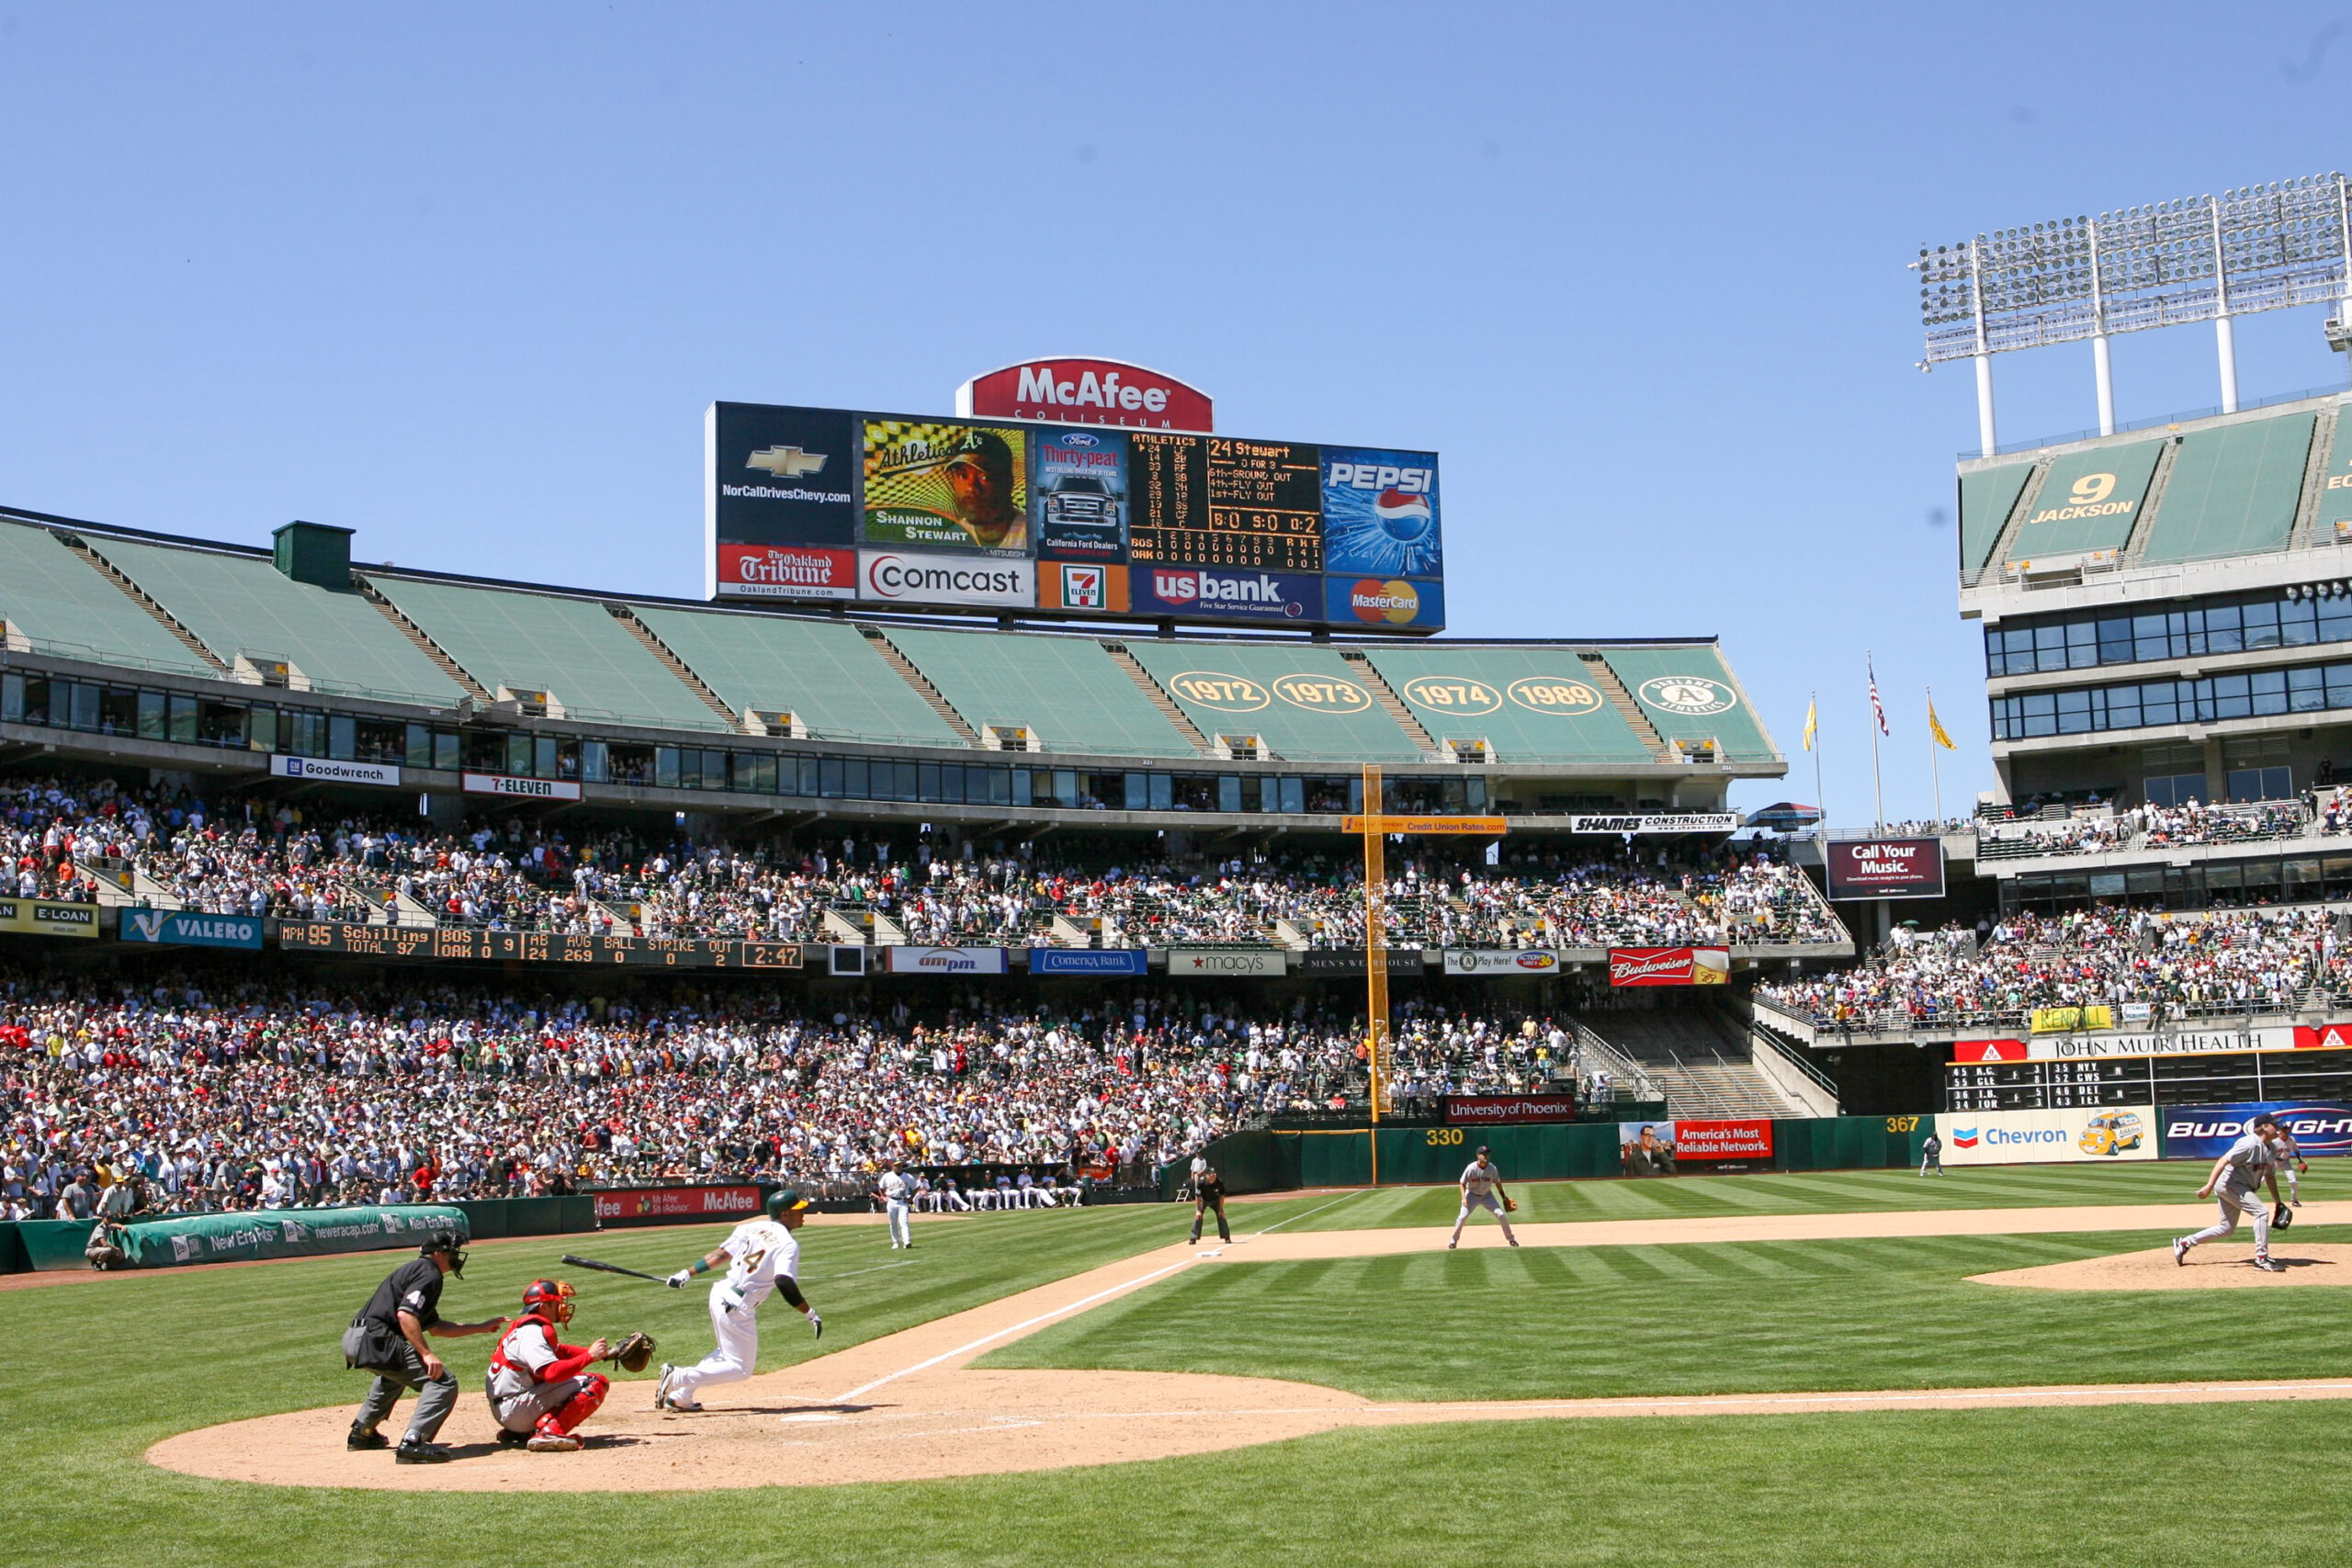 The days of baseball in Oakland are coming to a close. | Brad Mangin/MLB via Getty Images